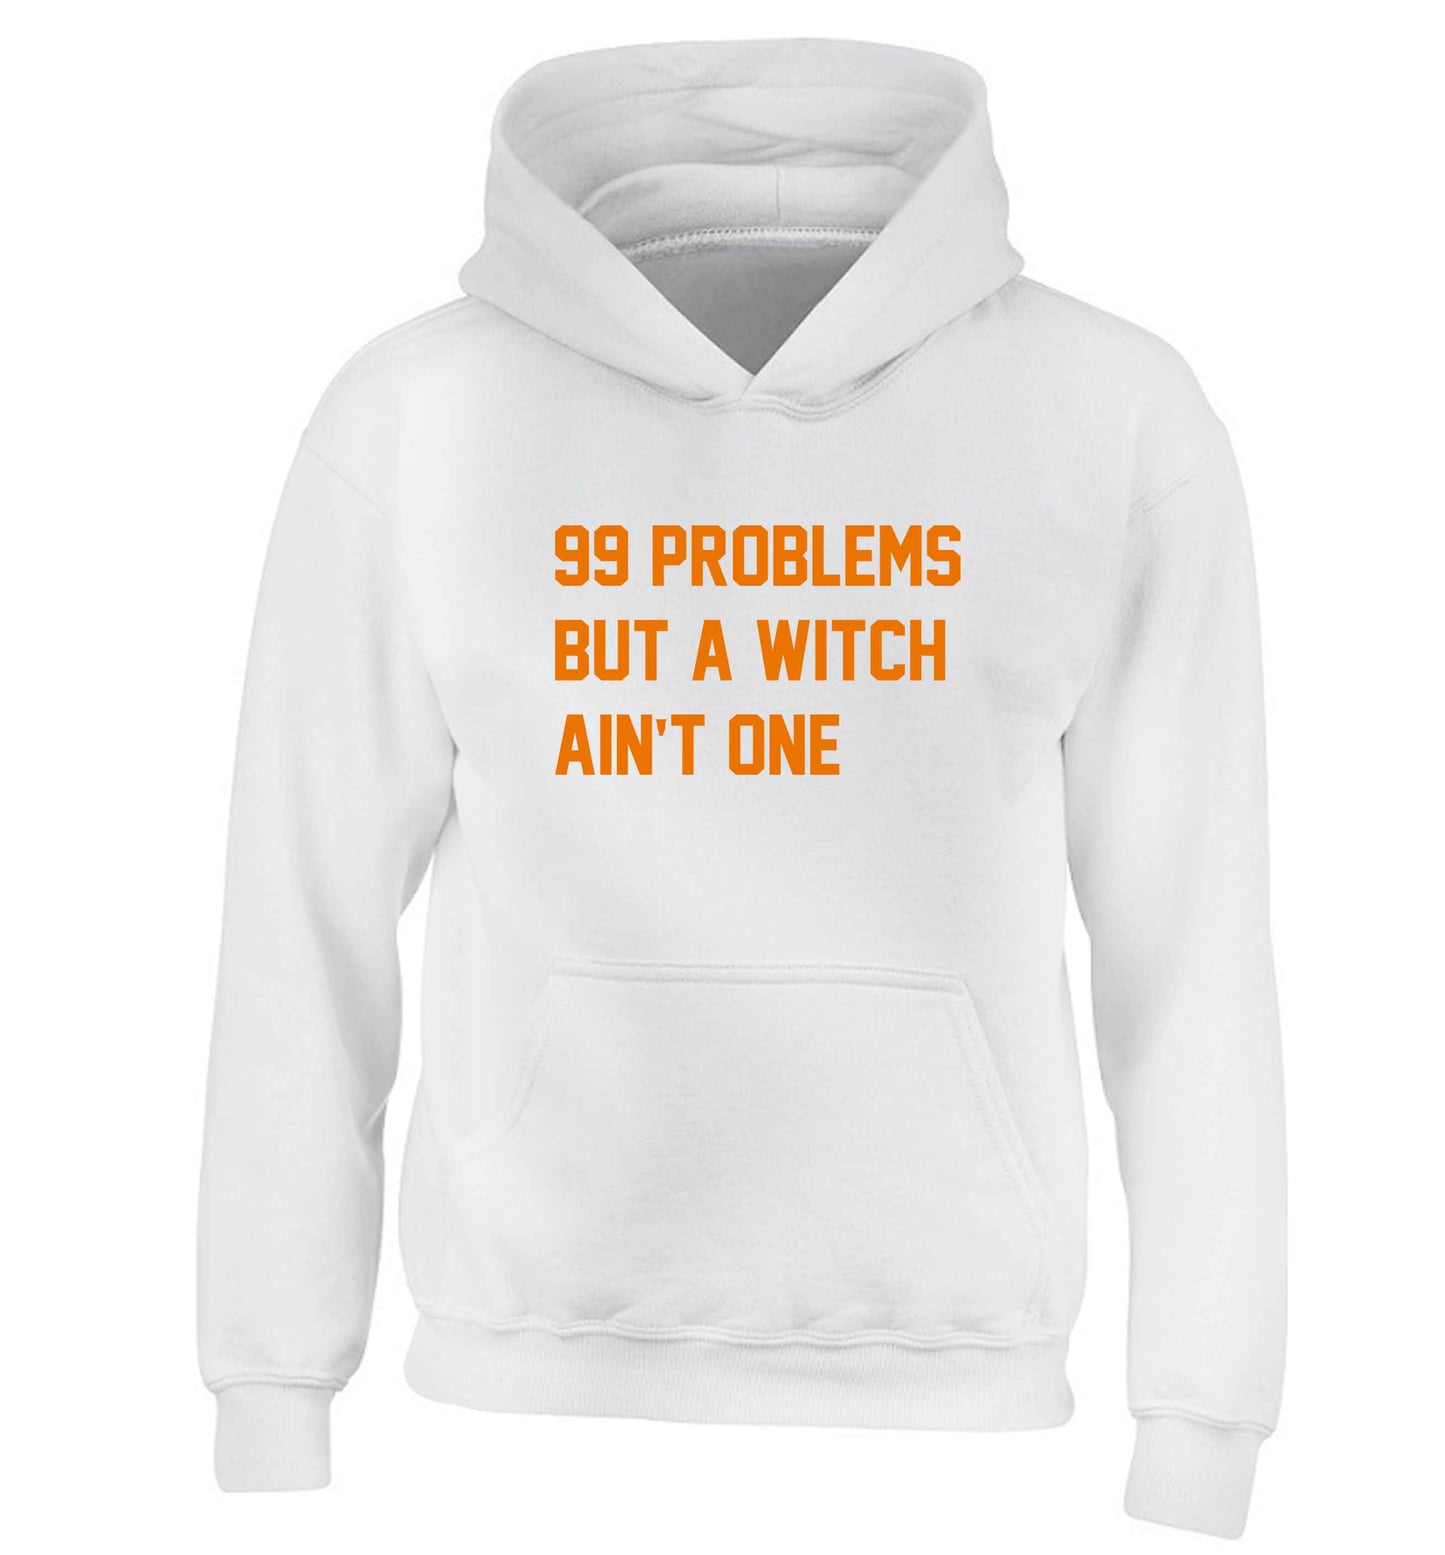 99 Problems but a witch aint one children's white hoodie 12-13 Years